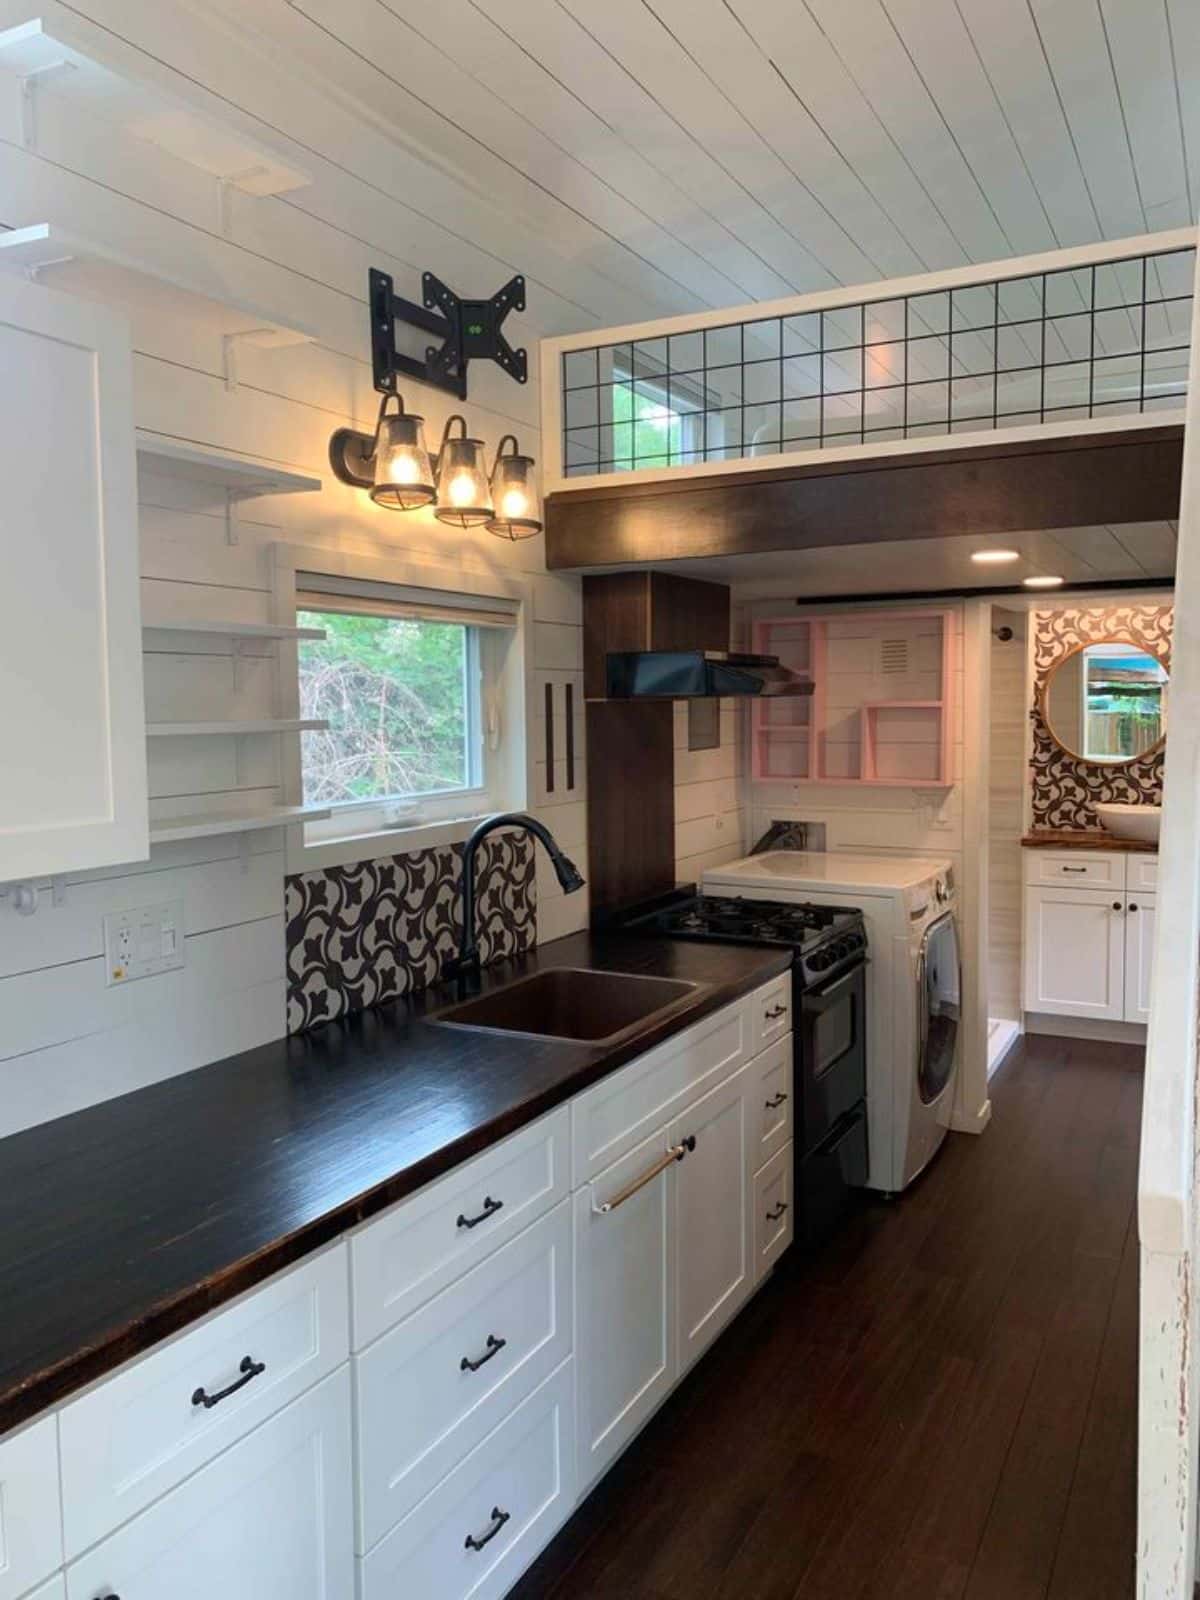 huge kitchen countertop with all the essential appliances and storage cabinets